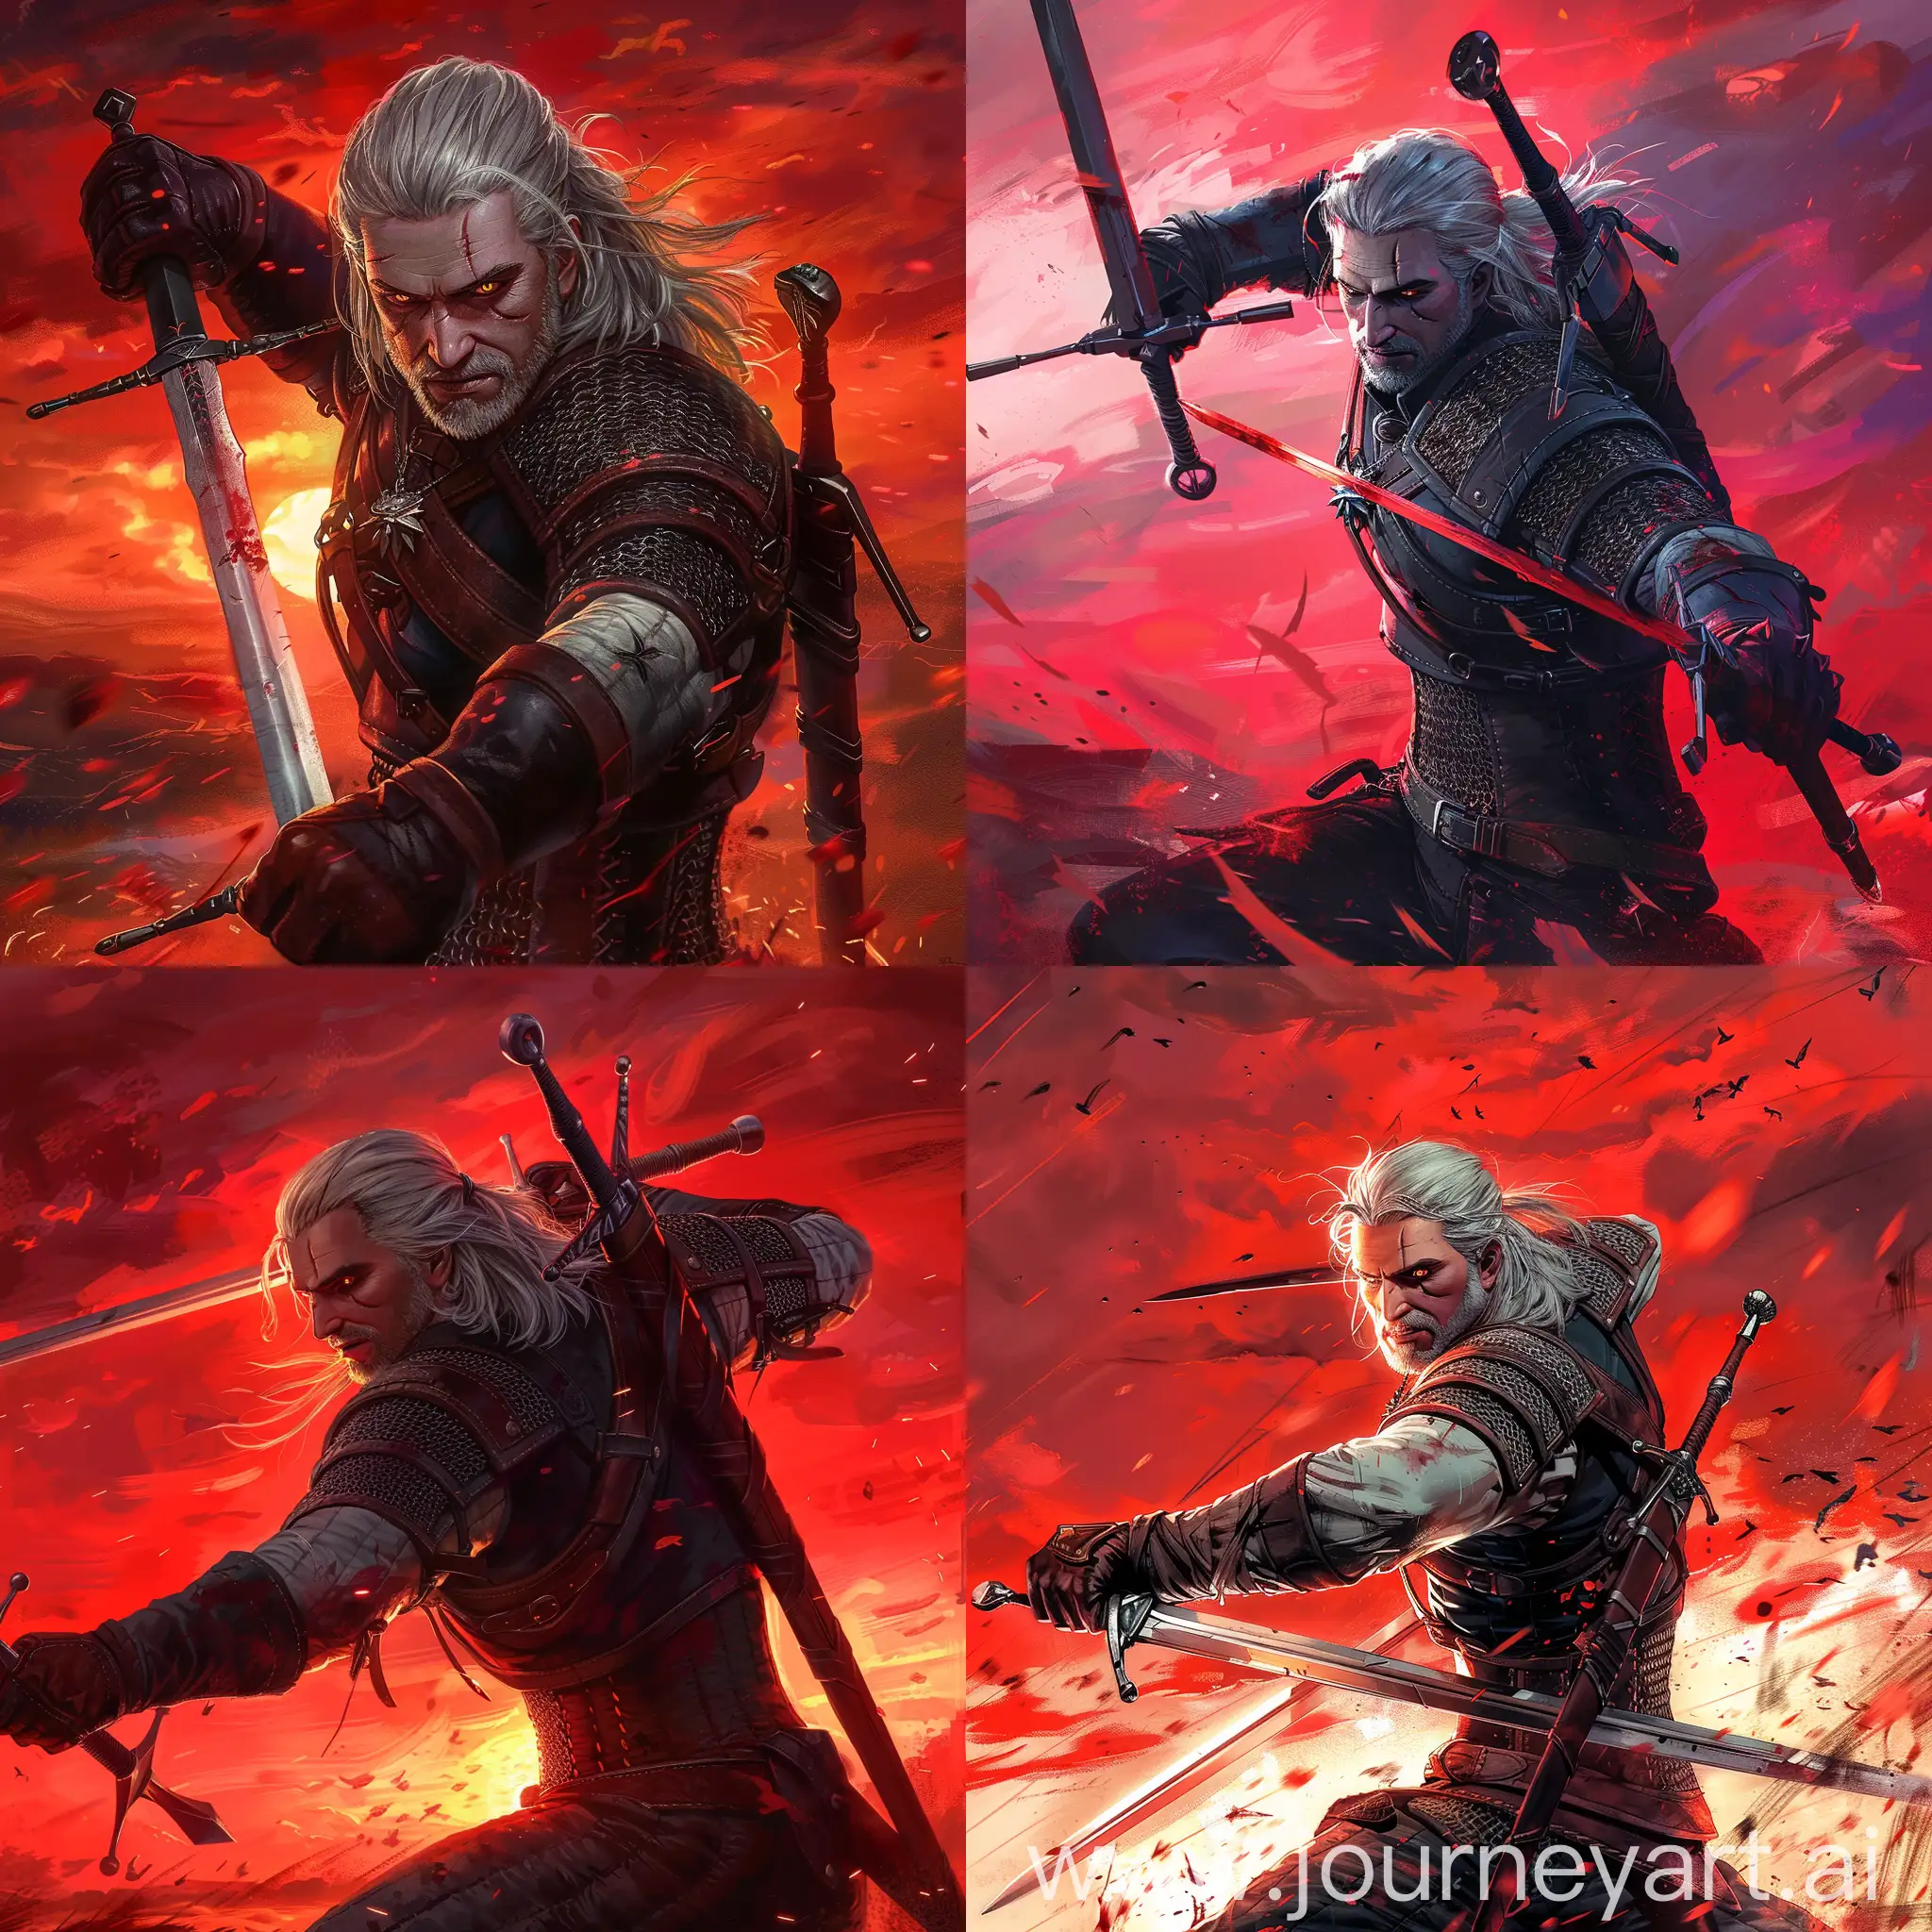 Geralt-of-Rivia-Engaged-in-SwordFighting-Under-a-Dramatic-Red-Sky